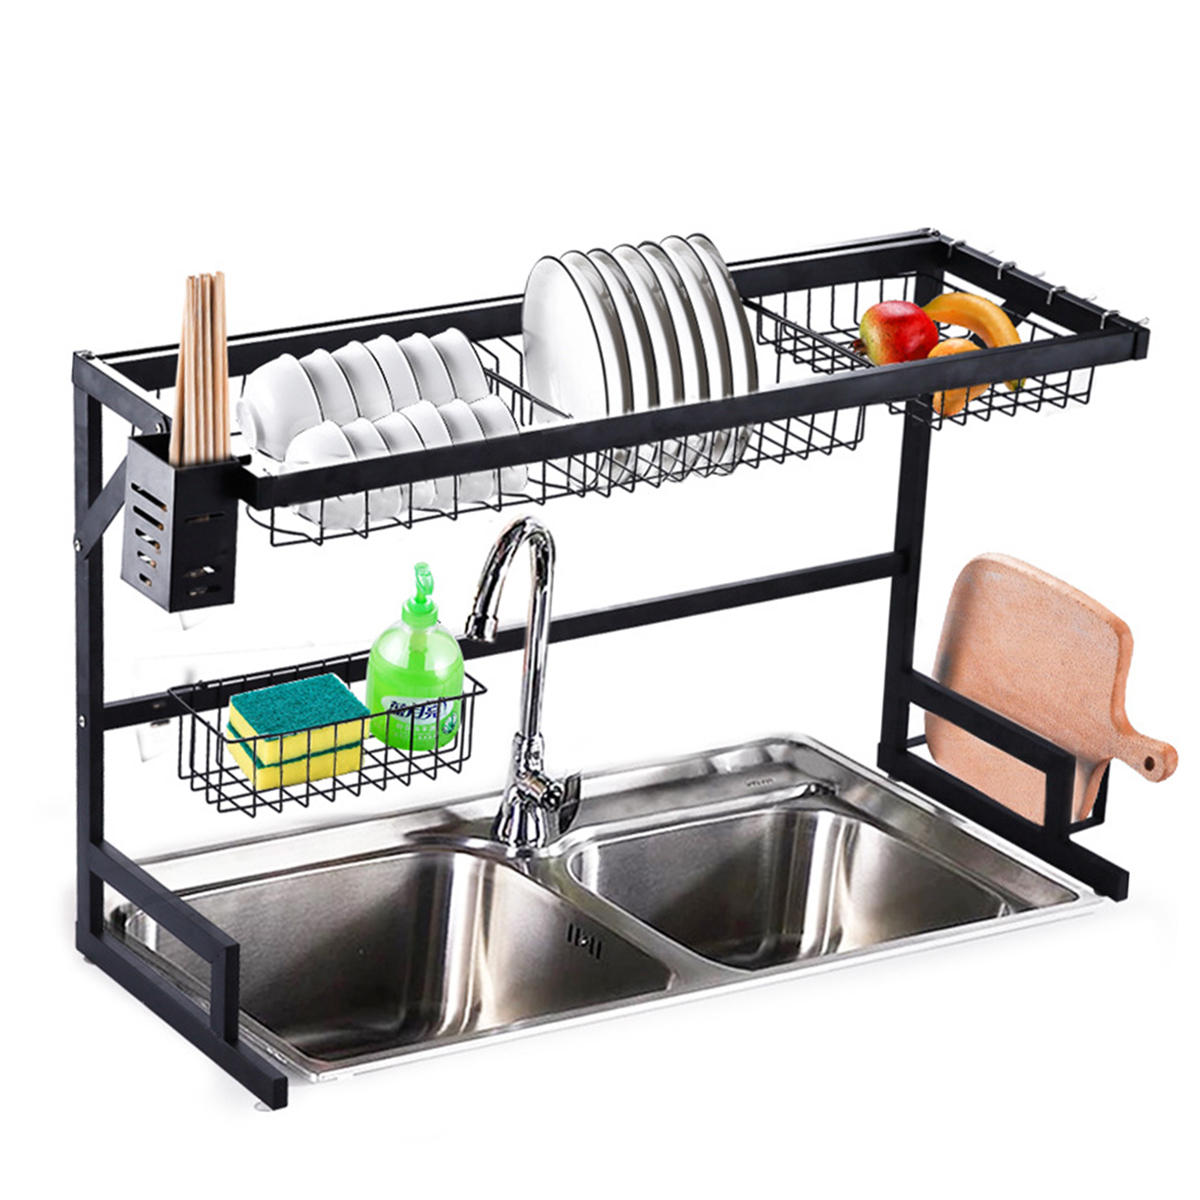 2 Tier Dish Drainer Over Double Sink Drying Rack Draining Tray